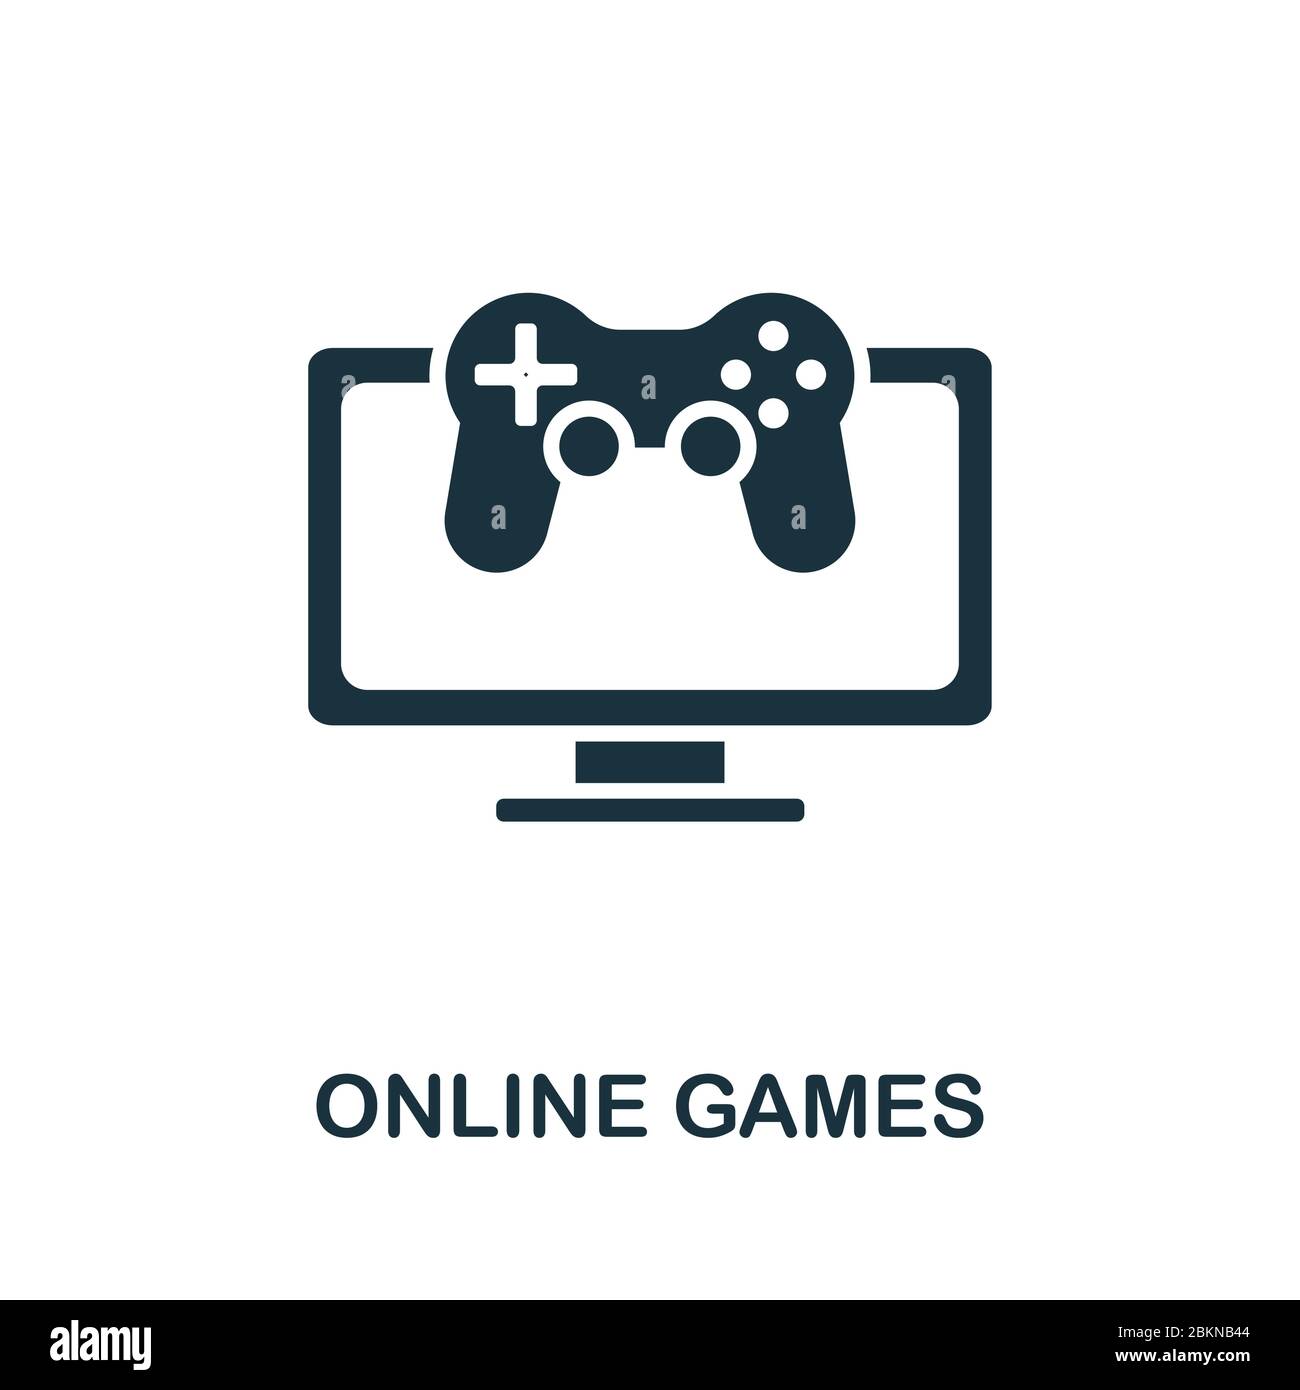 Onlinegames Projects  Photos, videos, logos, illustrations and